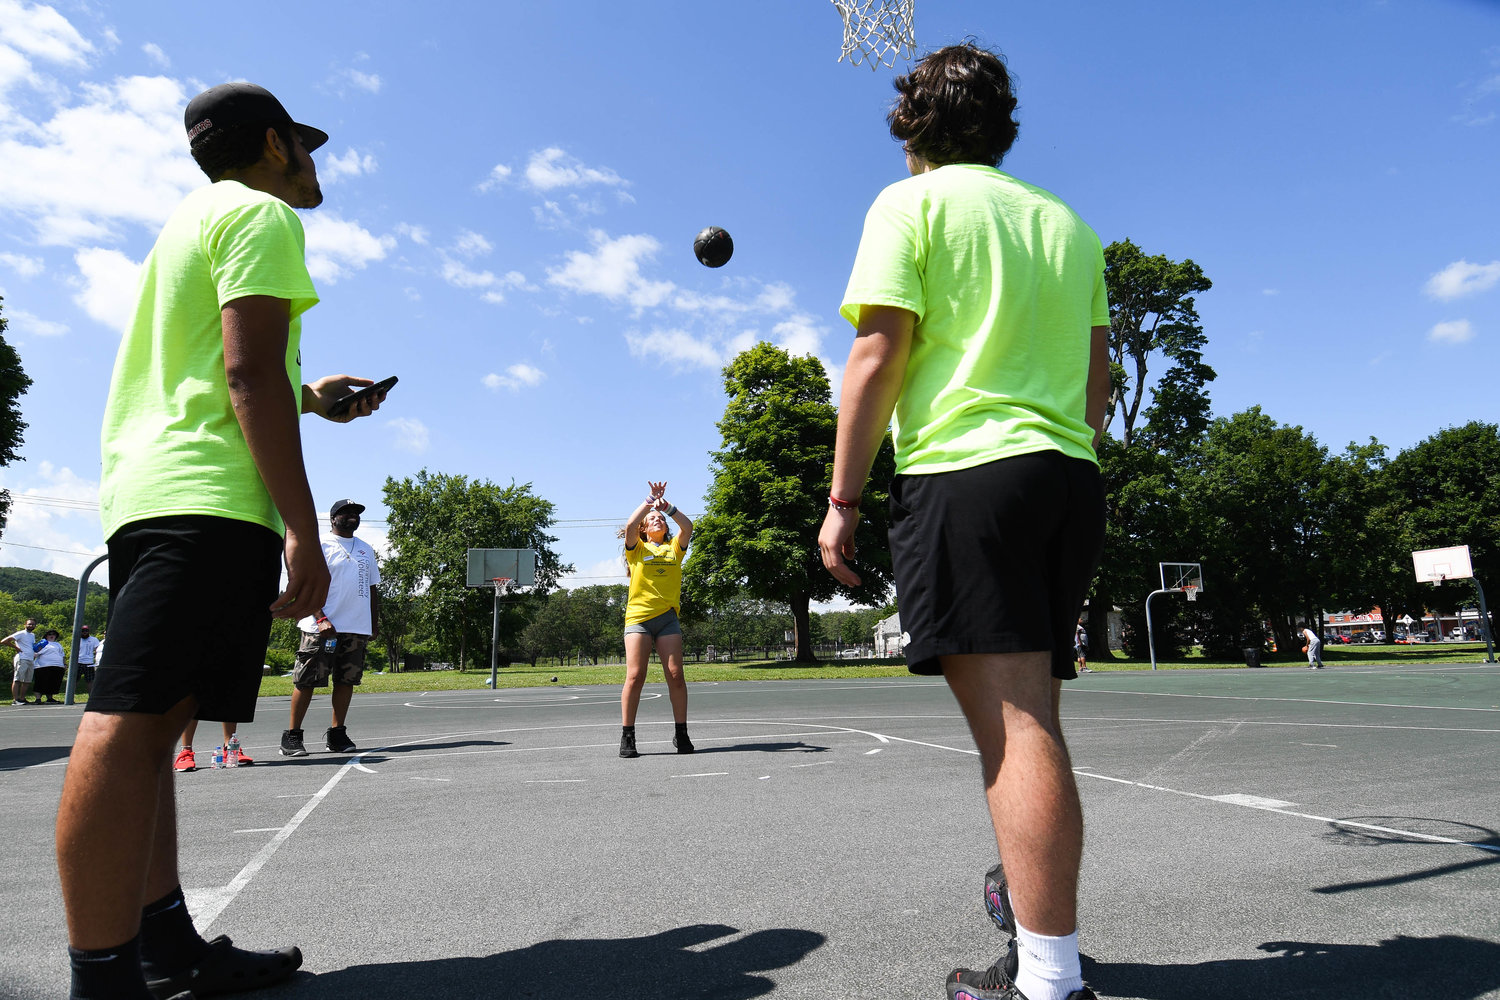 Children compete in basketball drills during the Boilermaker Youth Olympics on Thursday at T.R. Proctor Park in Utica.